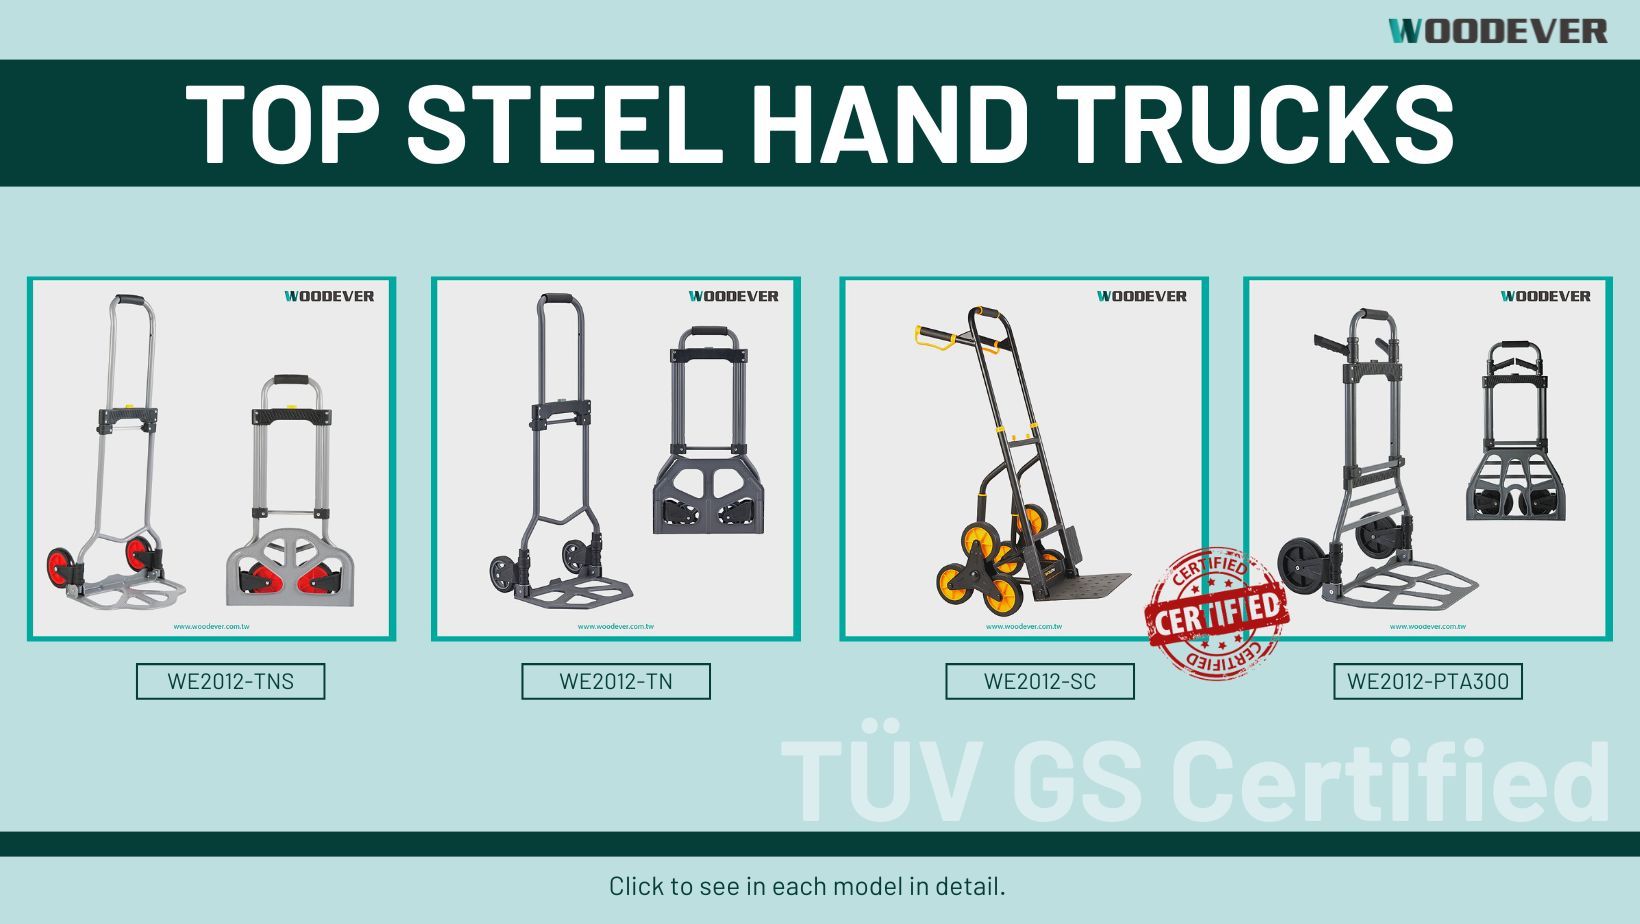 GS approve steel hand truck high quality